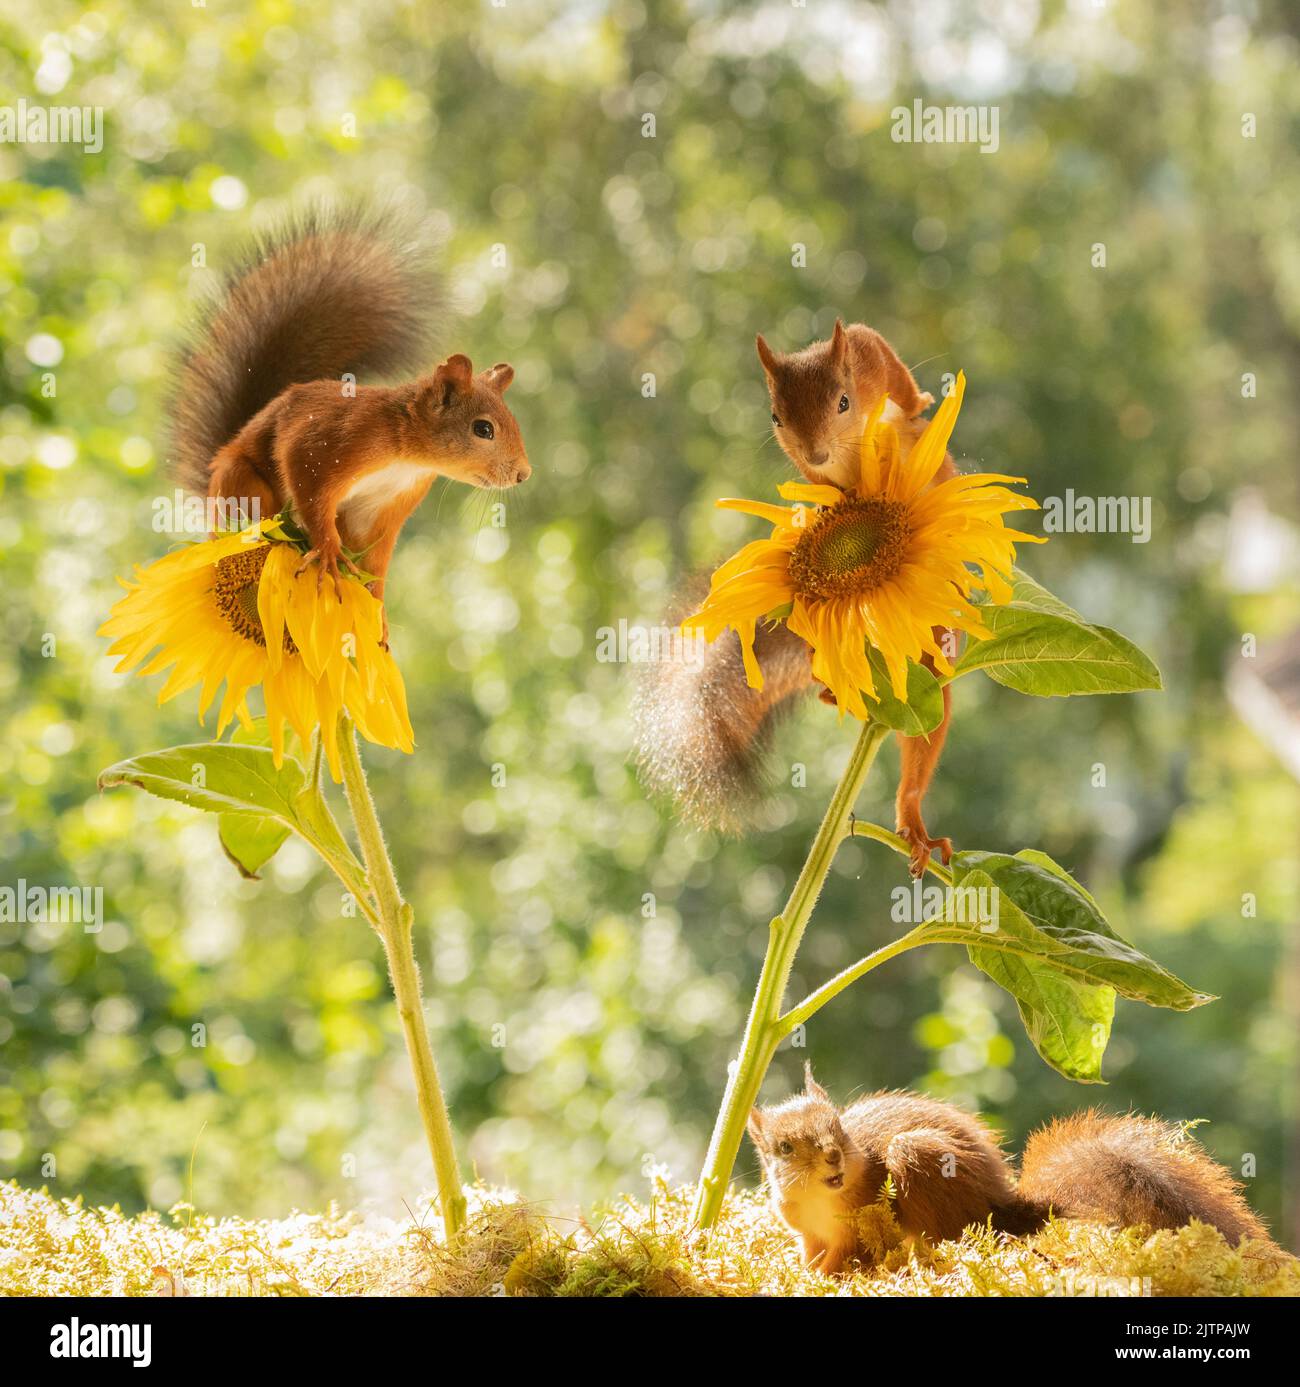 red squirrels are standing on sunflowers Stock Photo